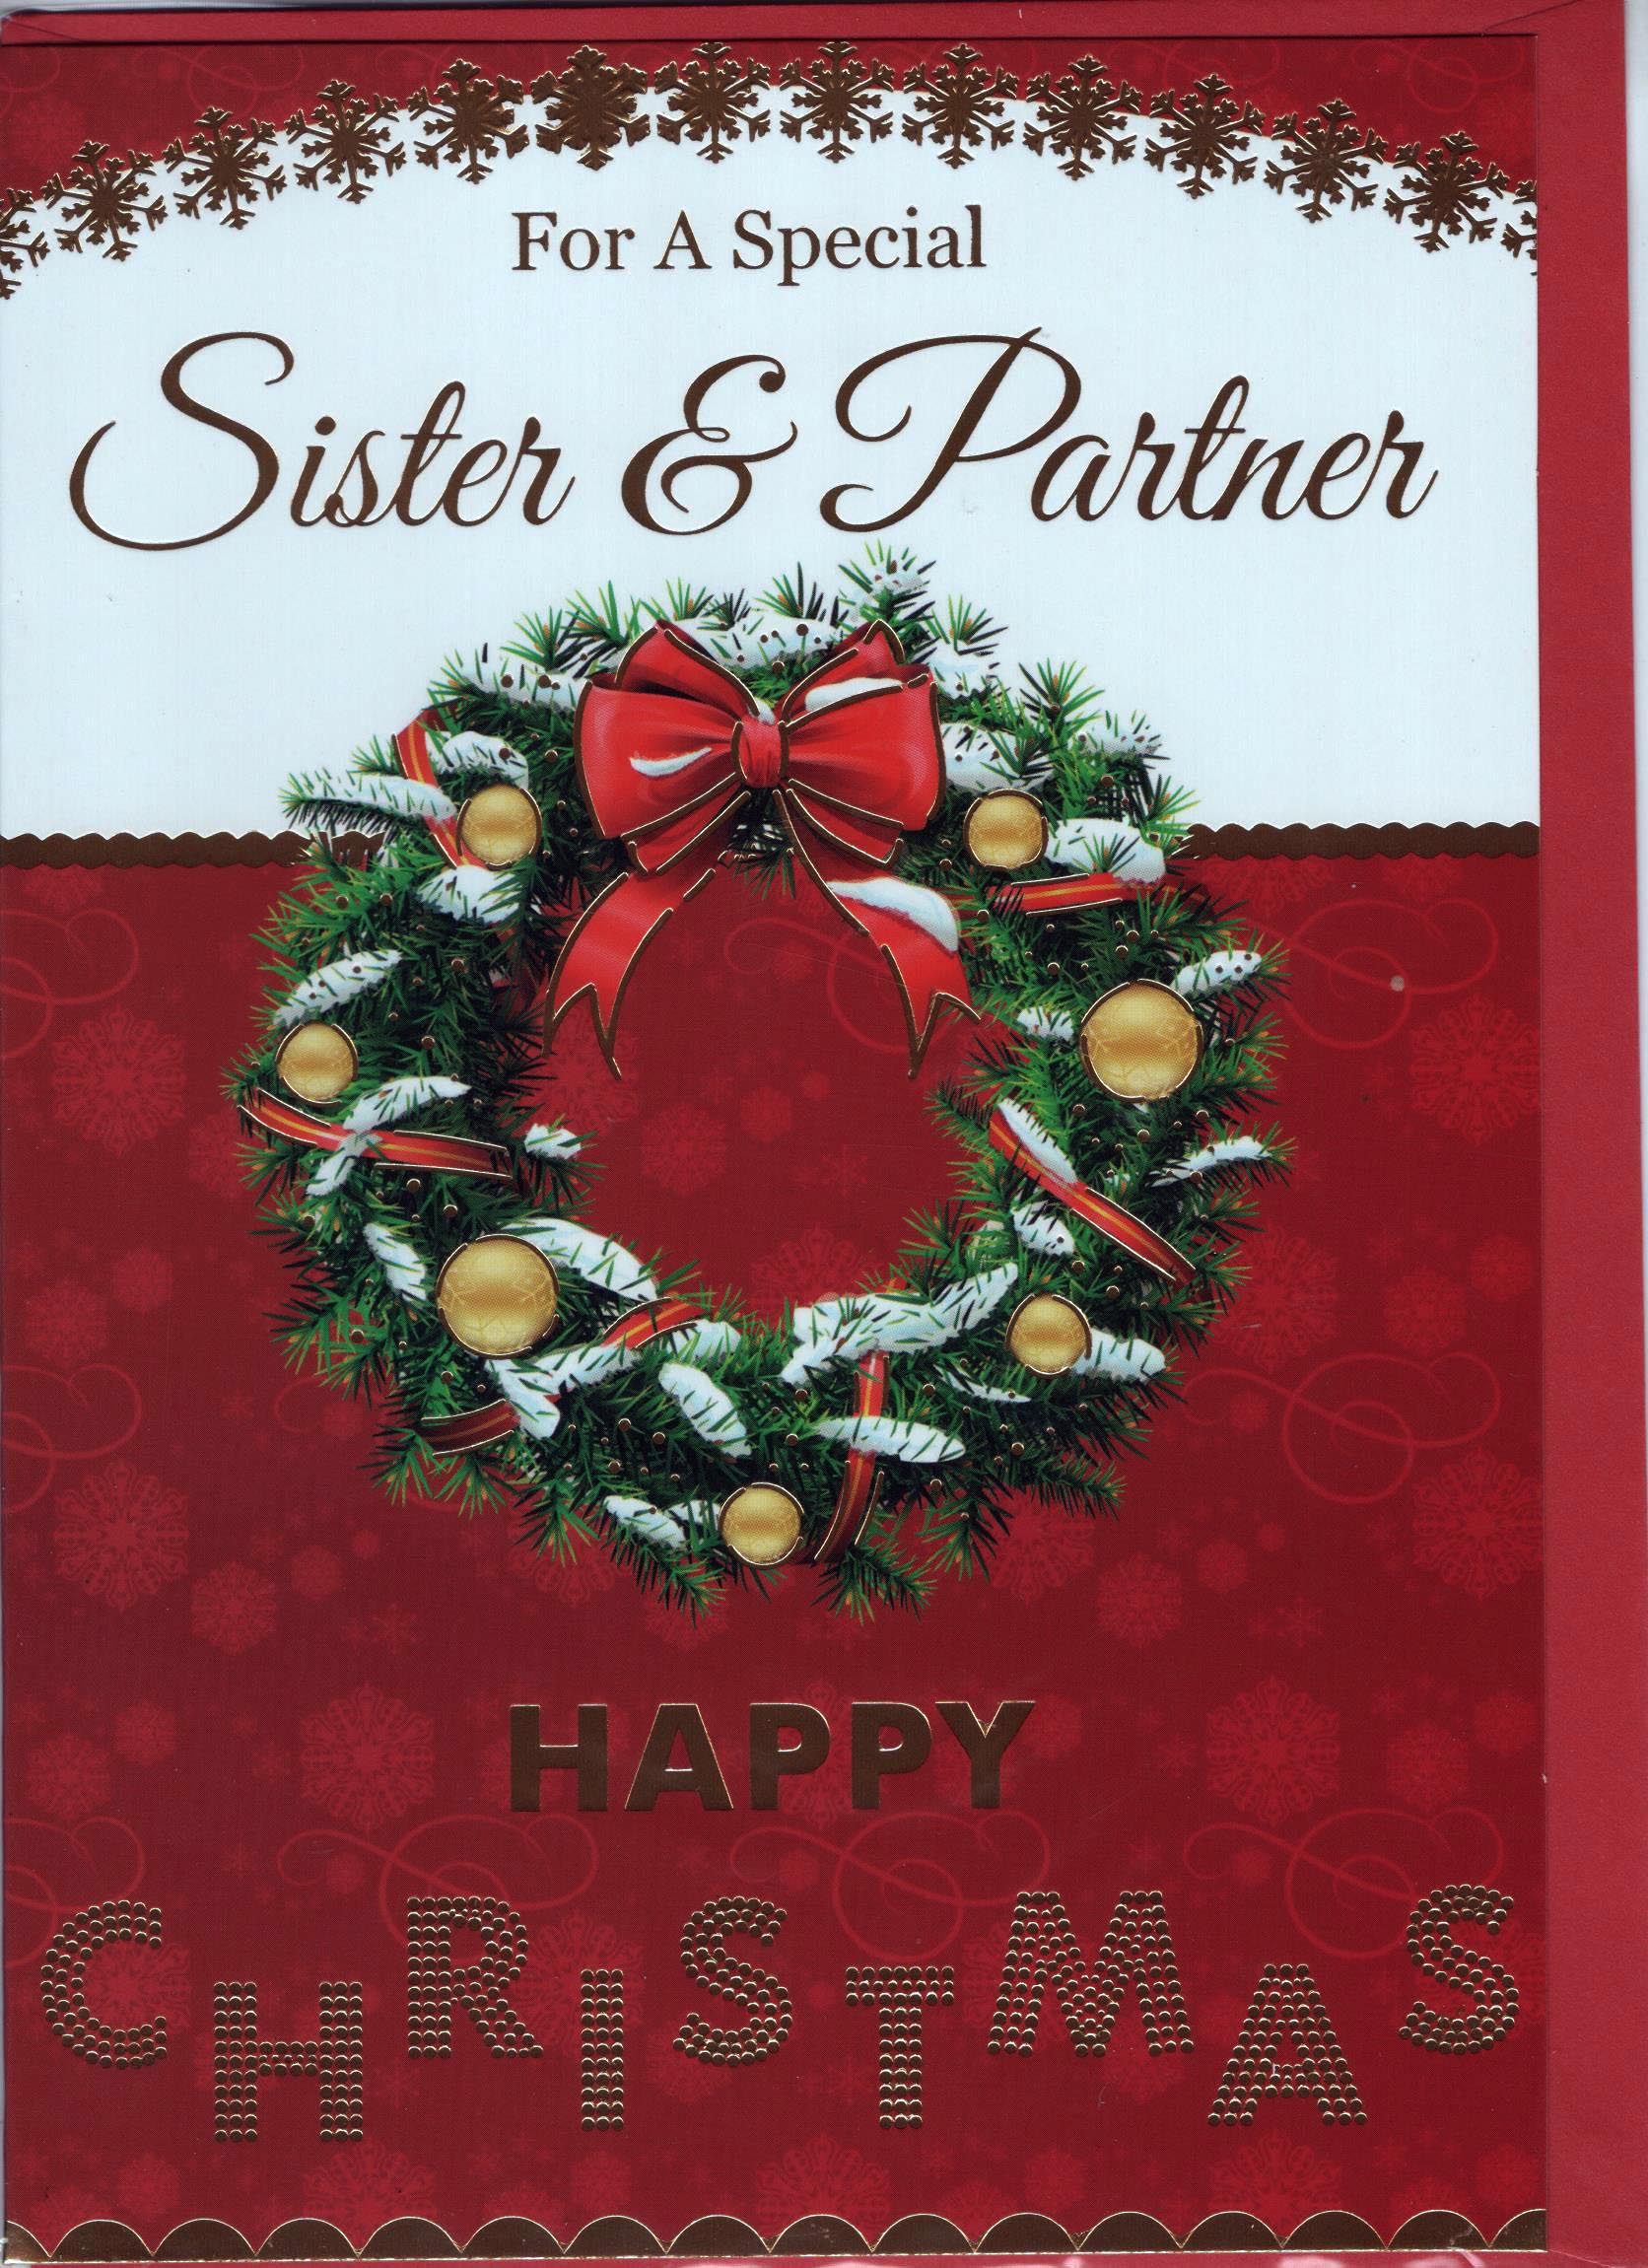 For a Special Sister & Partner Happy Christmas